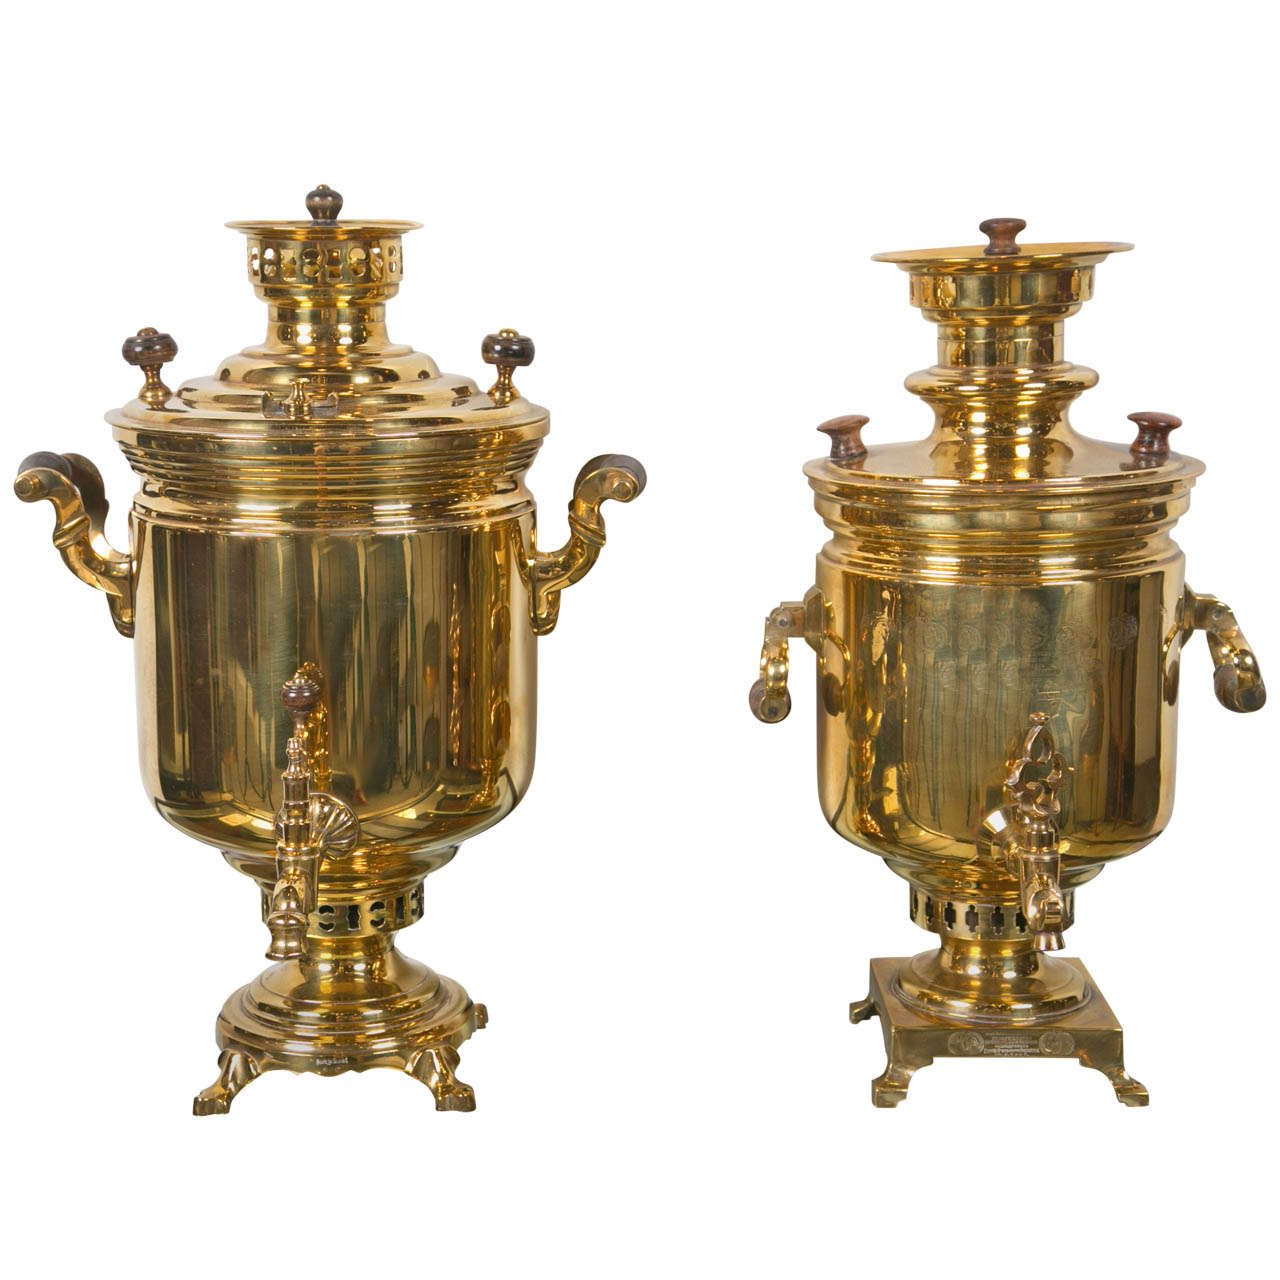 A Compatable Pair of Russian Samovars